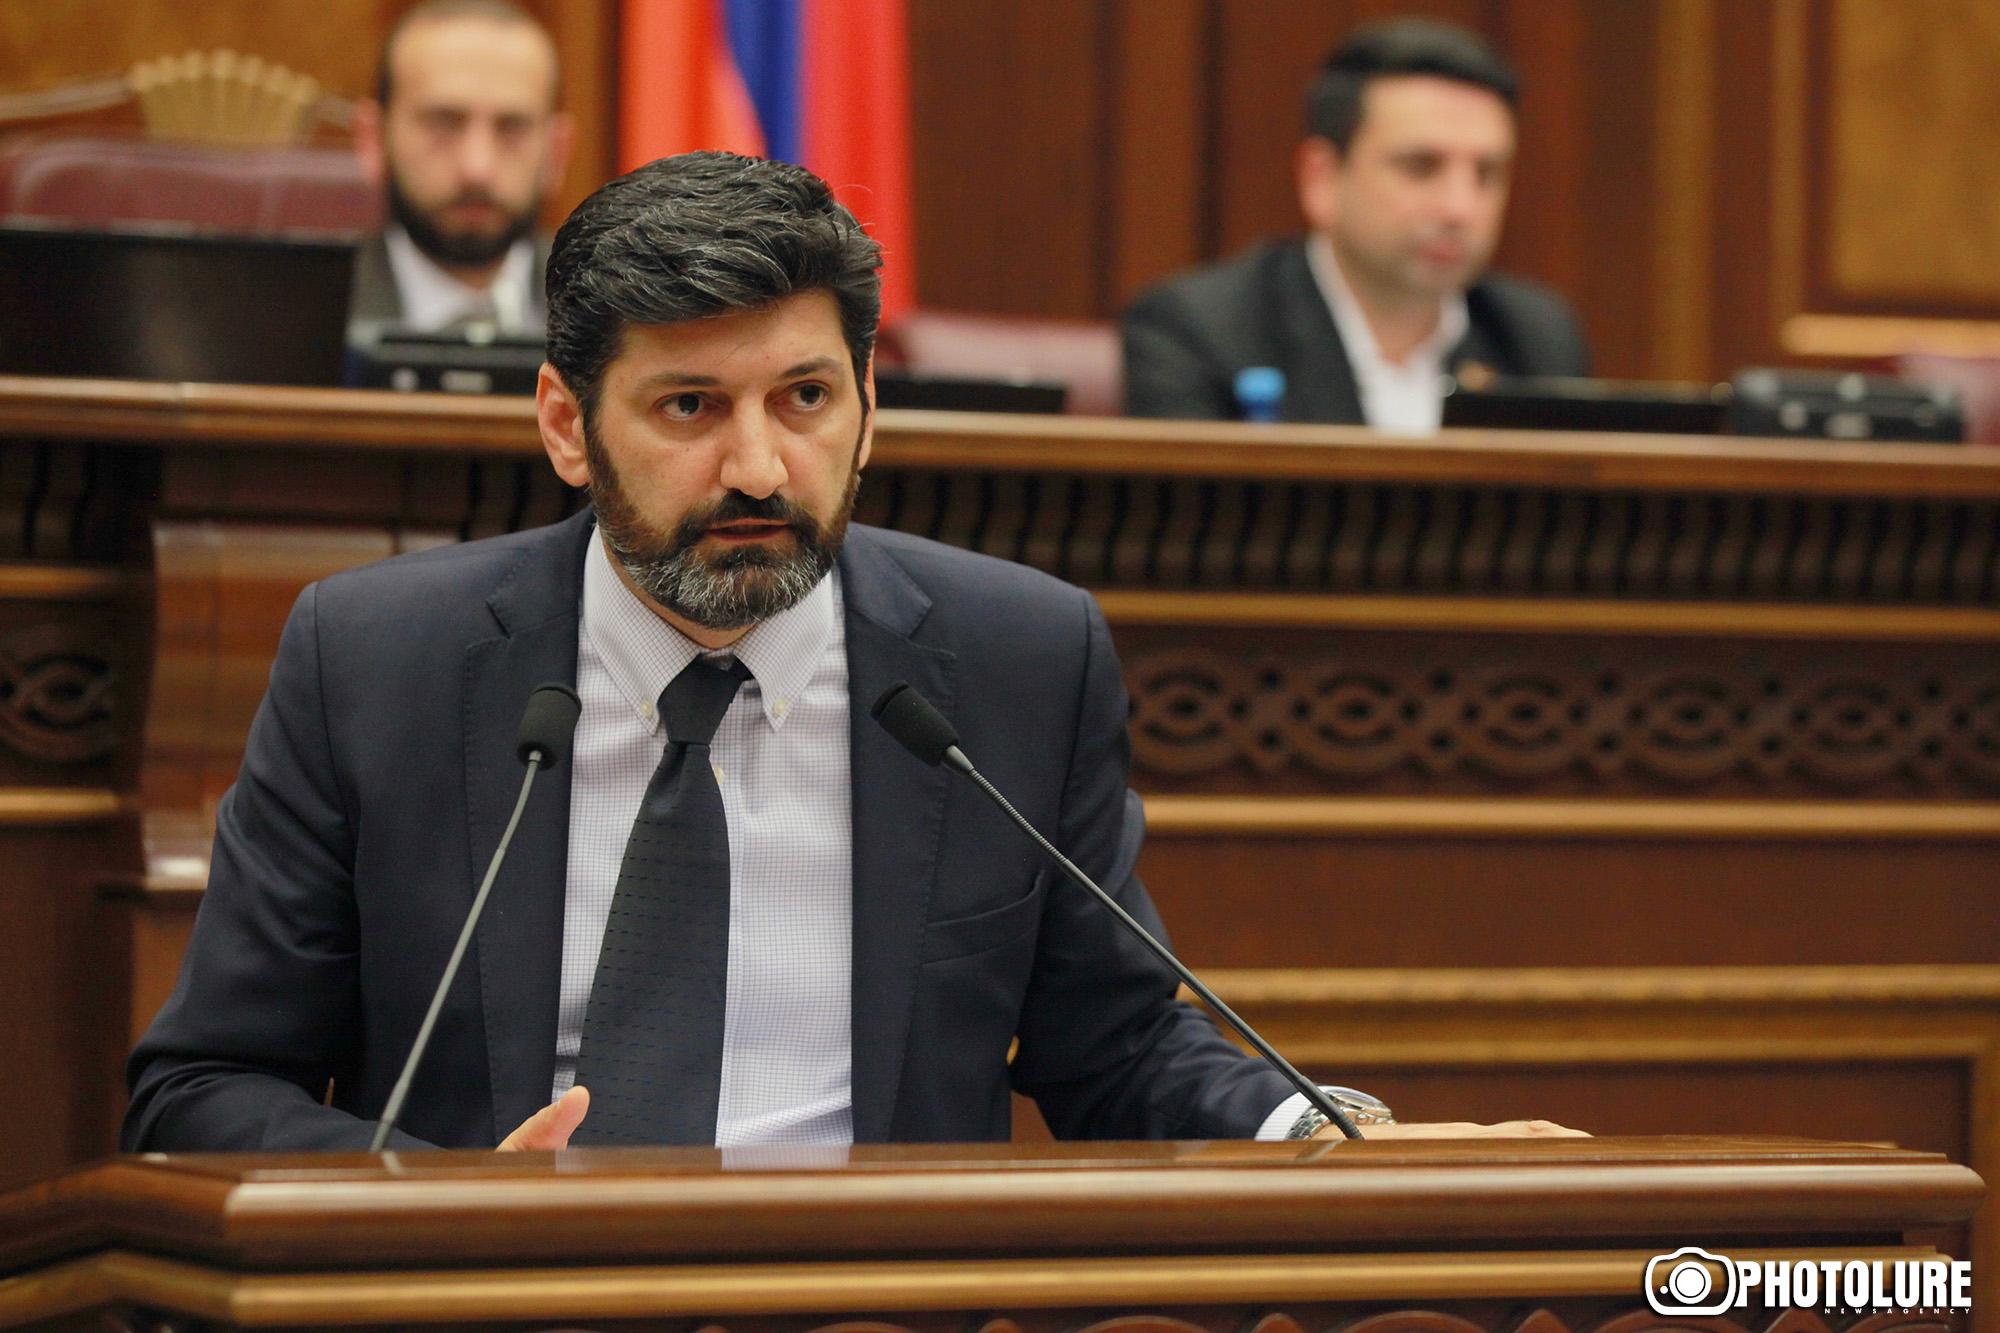 Lawyer Vahe Grigoryan Confirmed to Armenia’s Constitutional Court